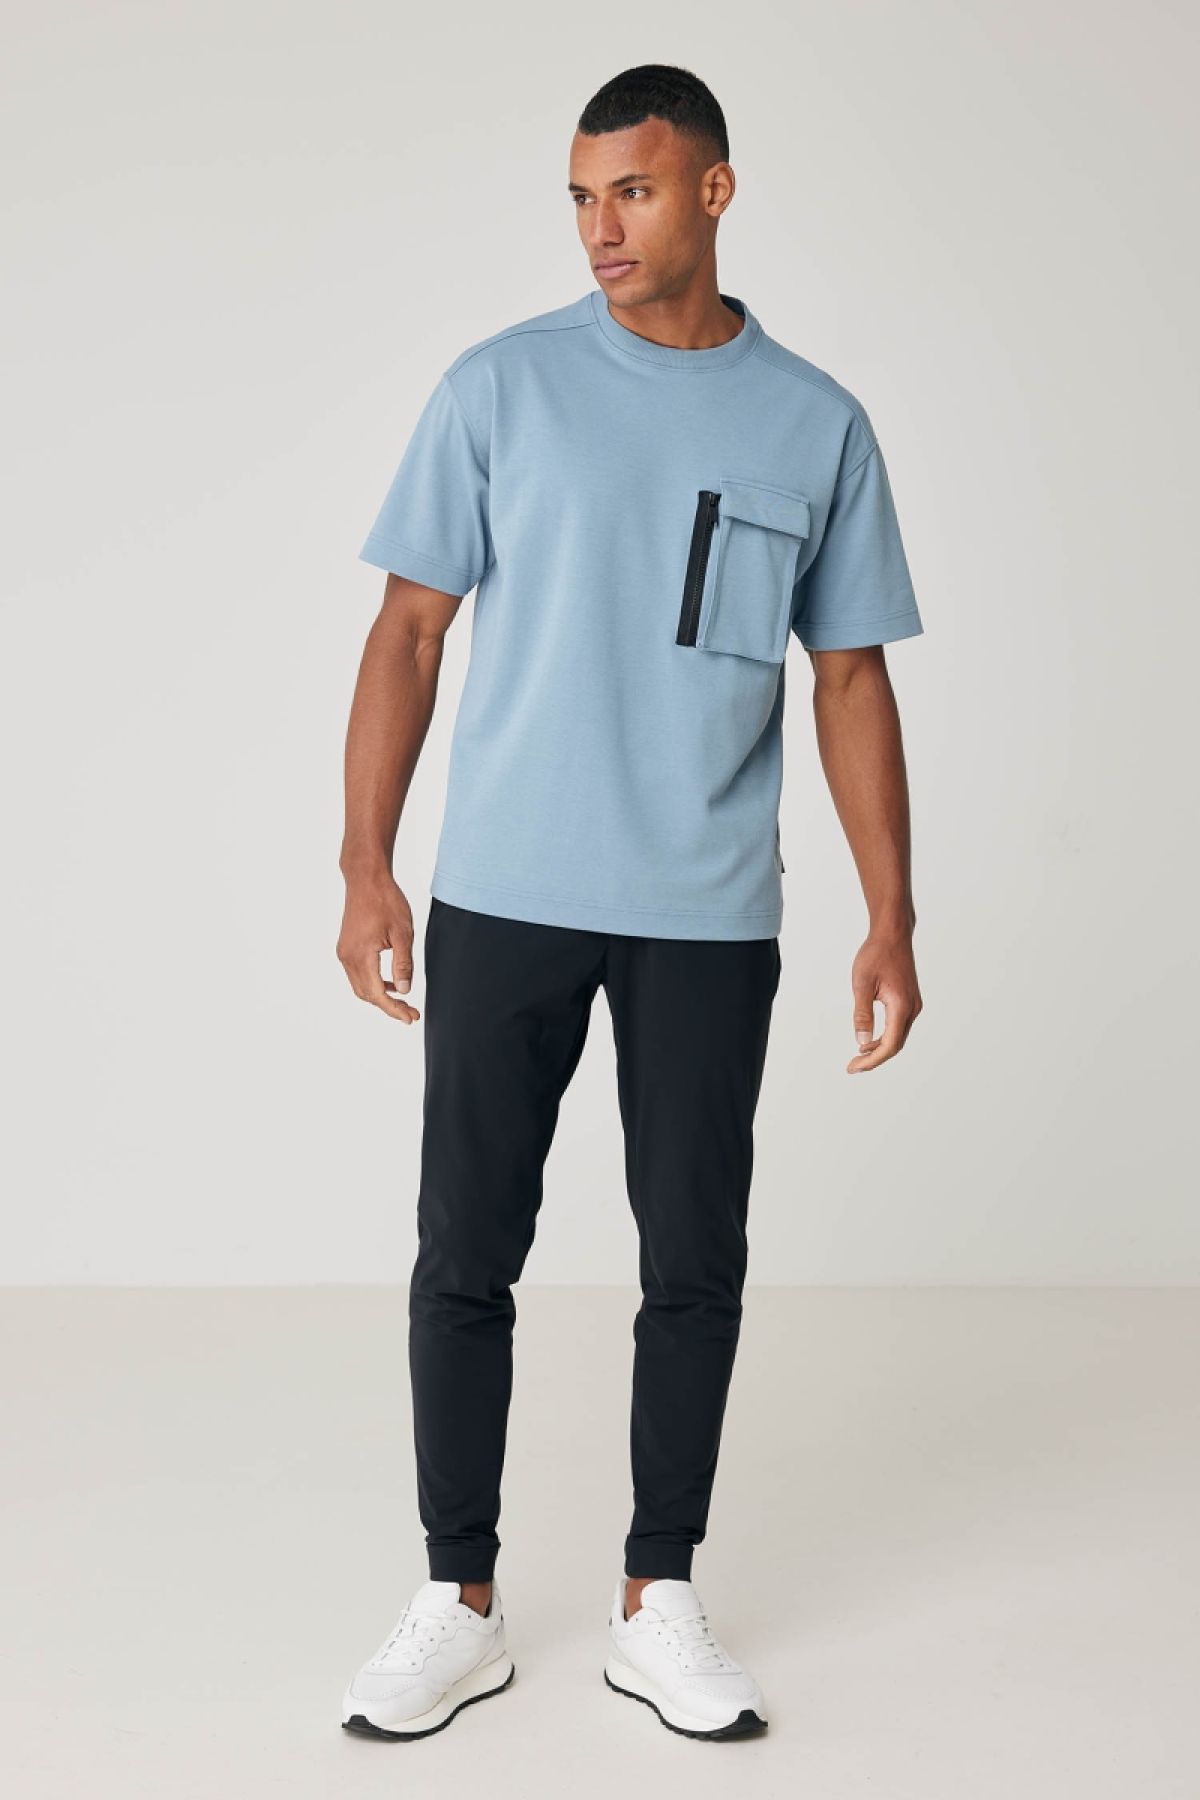 Relaxed fit tee pocket blauw